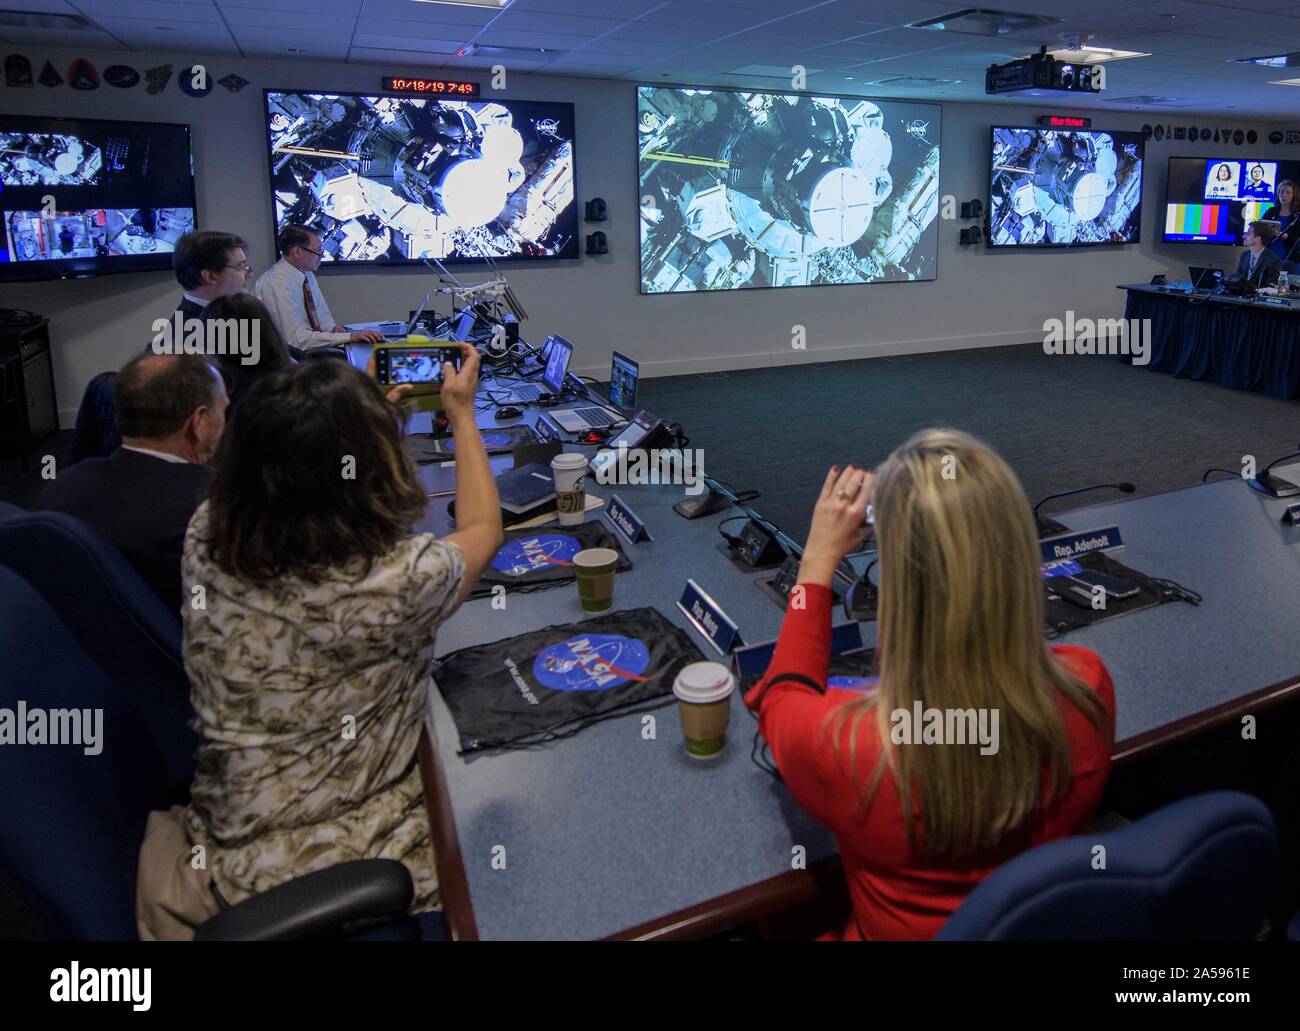 Washington, United States of America. 18 October, 2019. U.S. Rep. Kendra Horn, left, and Rep. Grace Meng, right, watch NASA astronauts Christina Koch and Jessica Meir during the first all-woman spacewalk from the Space Operations Center October 18, 2019 in Washington, DC. Credit: Joel Kowsky/NASA/Alamy Live News Stock Photo